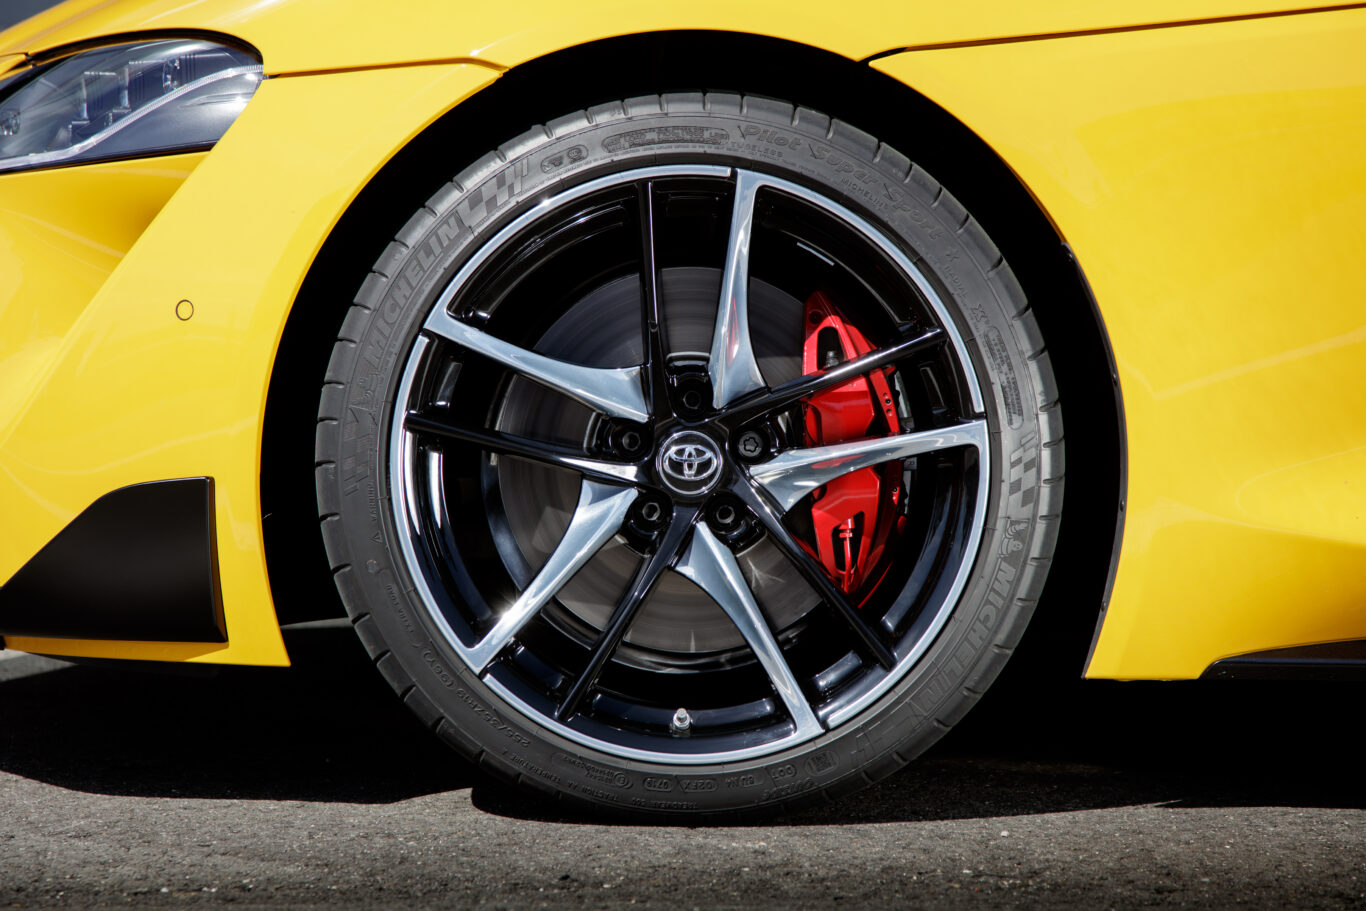 The Supra gets intricate alloy wheels